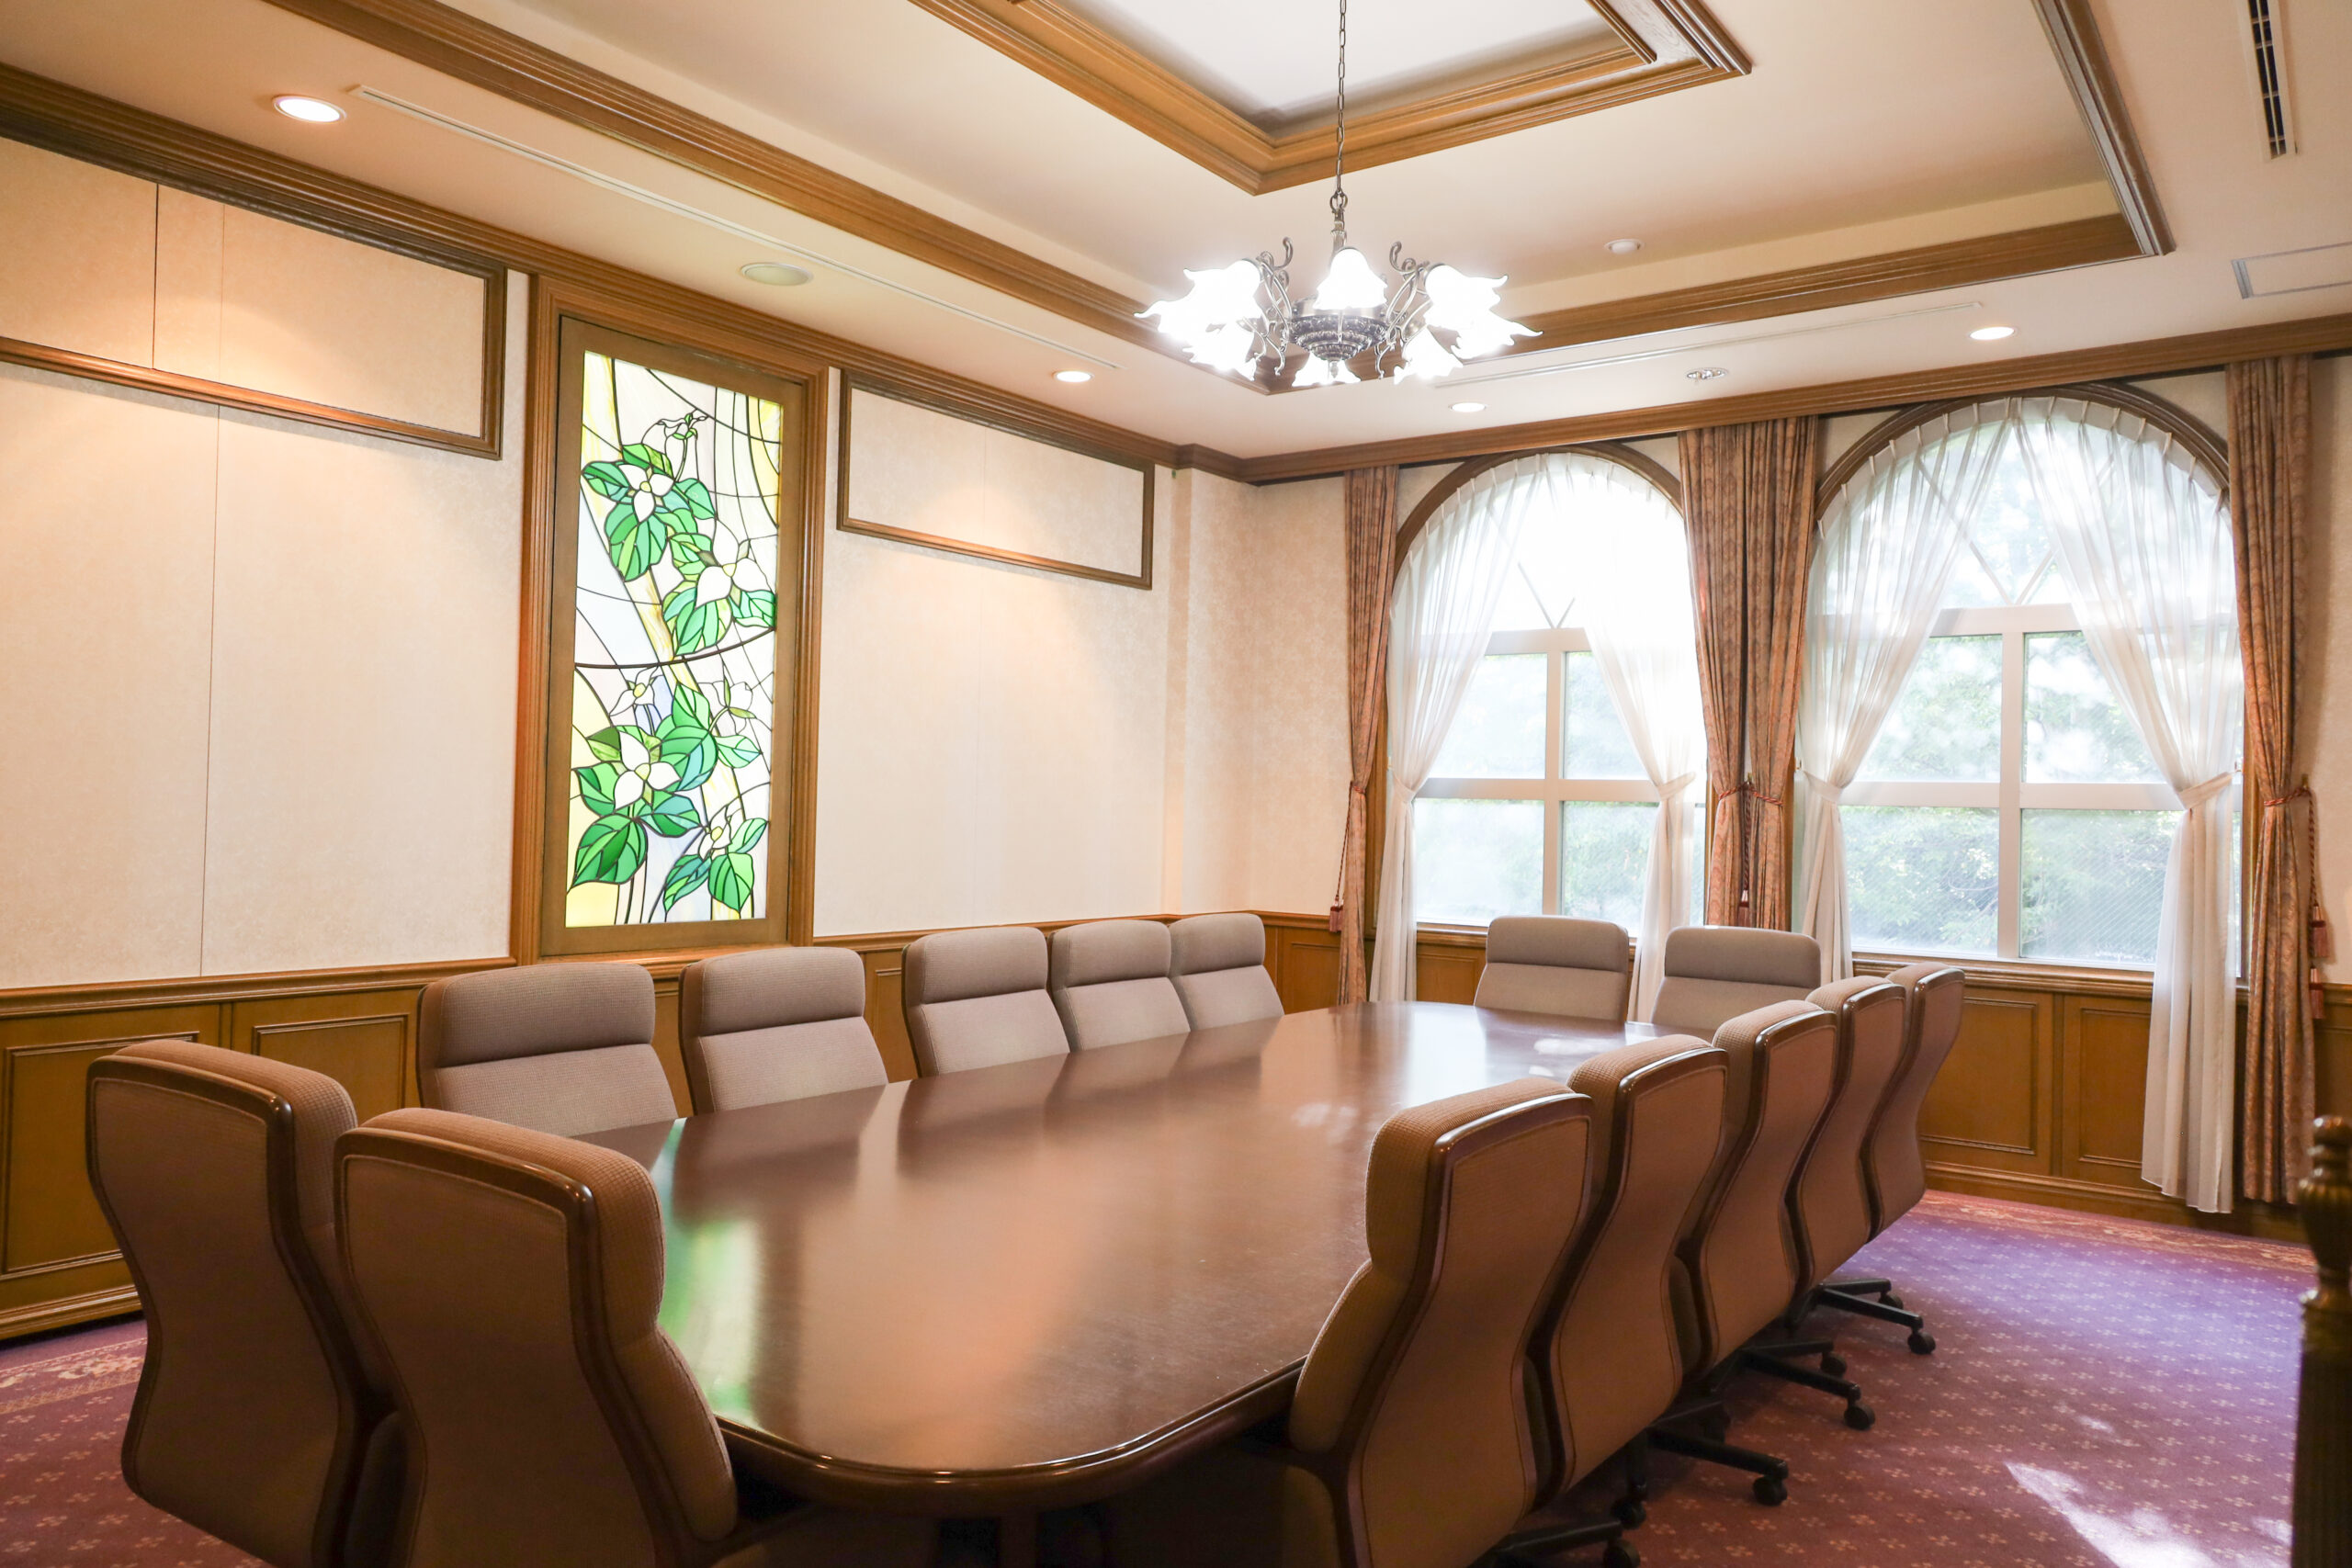 An interior look of the antique conference room. A rounded-rectangle-shaped conference table is sitting in the middle surrounded by conference chairs. On the left-side wall there is  a stained glass window portraying Trilliums.